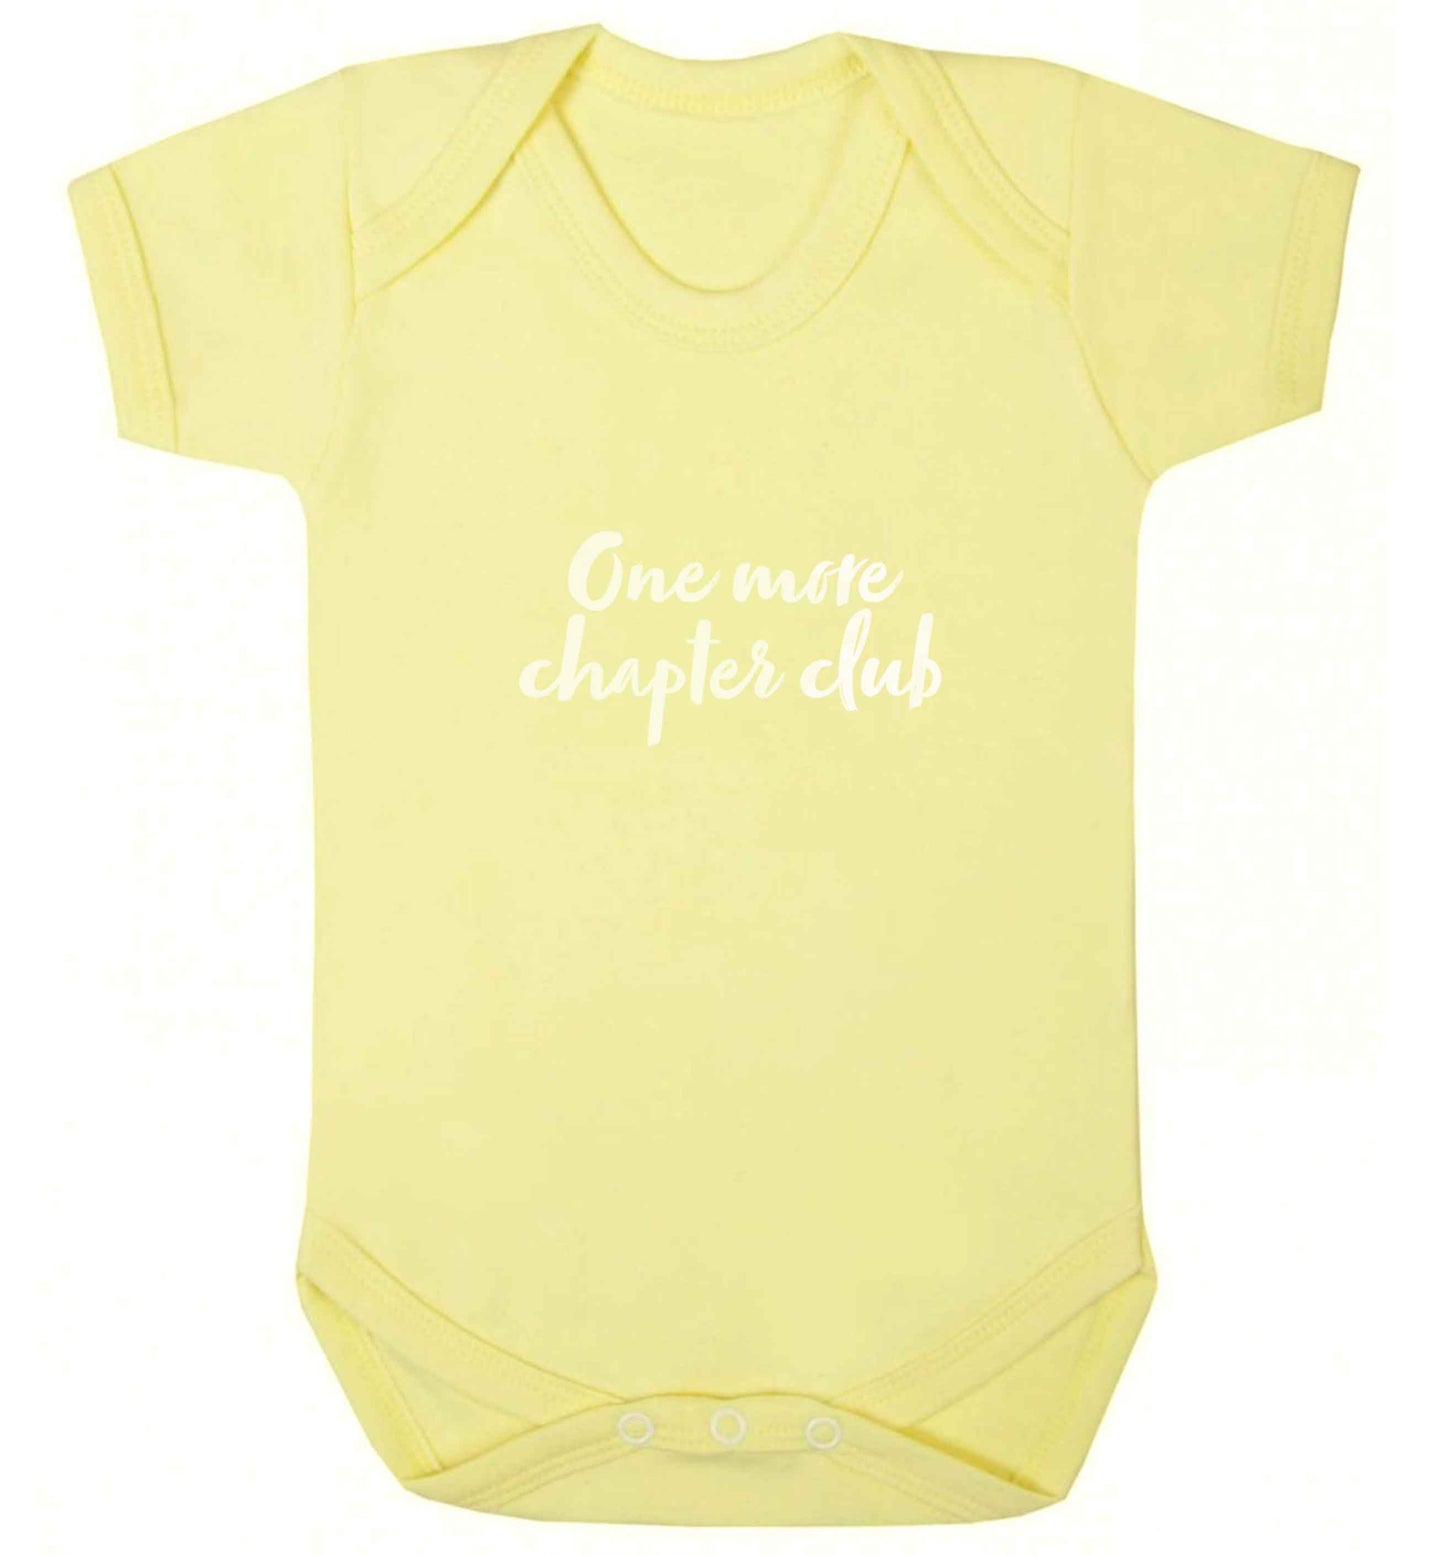 One more chapter club Kit baby vest pale yellow 18-24 months